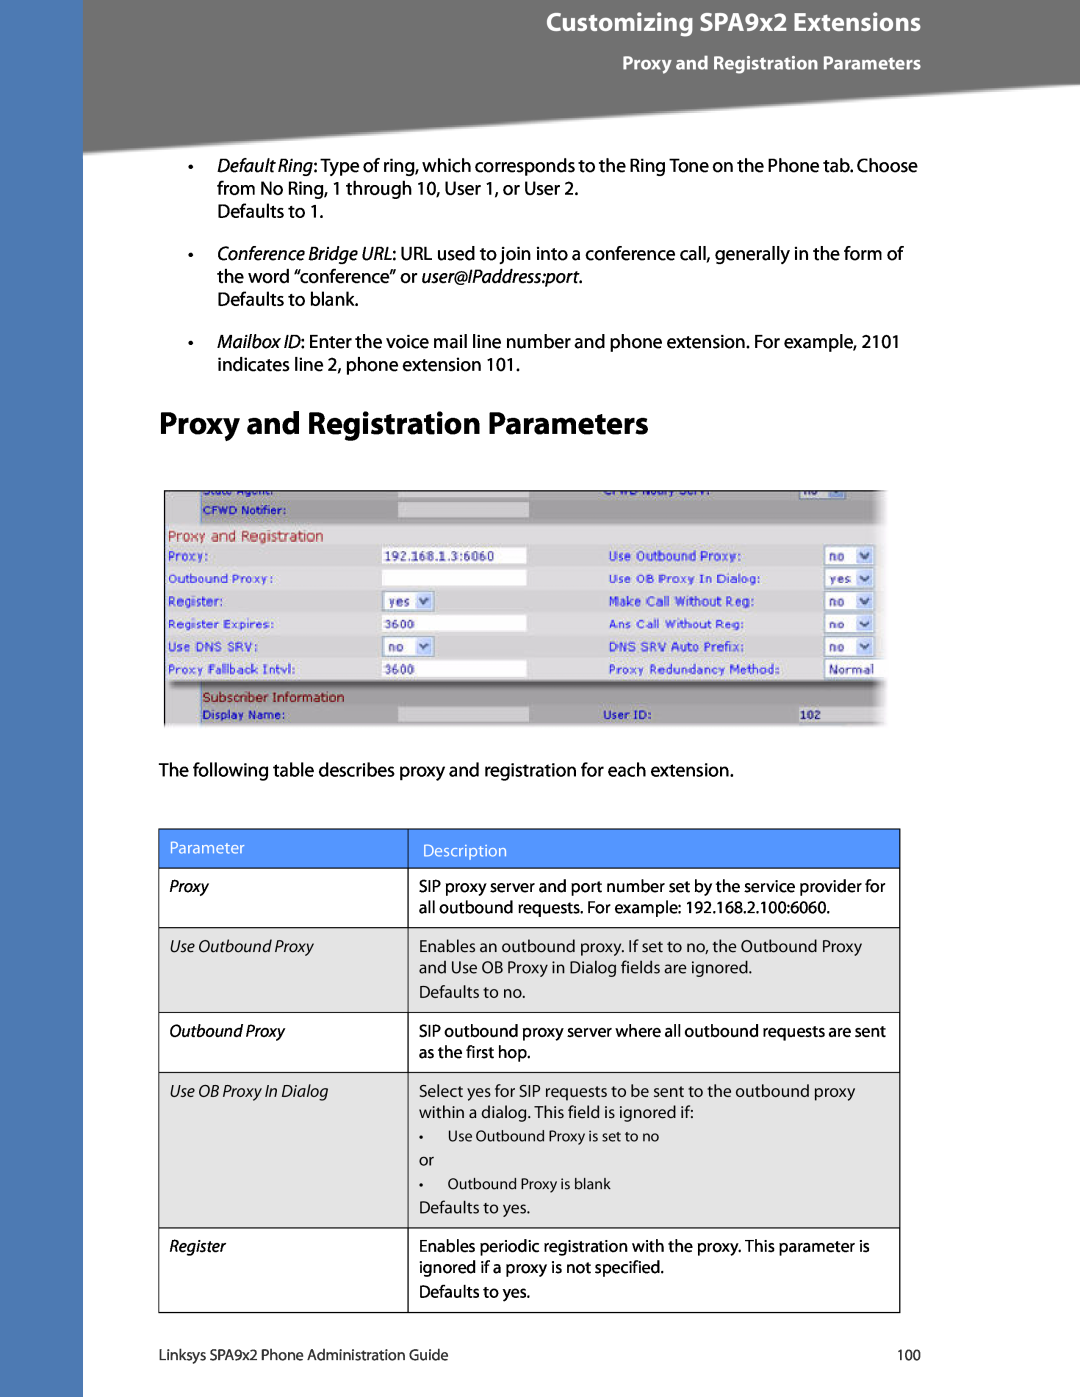 Linksys SPA922, SPA962, SPA942, SPA932 manual Proxy and Registration Parameters, Customizing SPA9x2 Extensions 